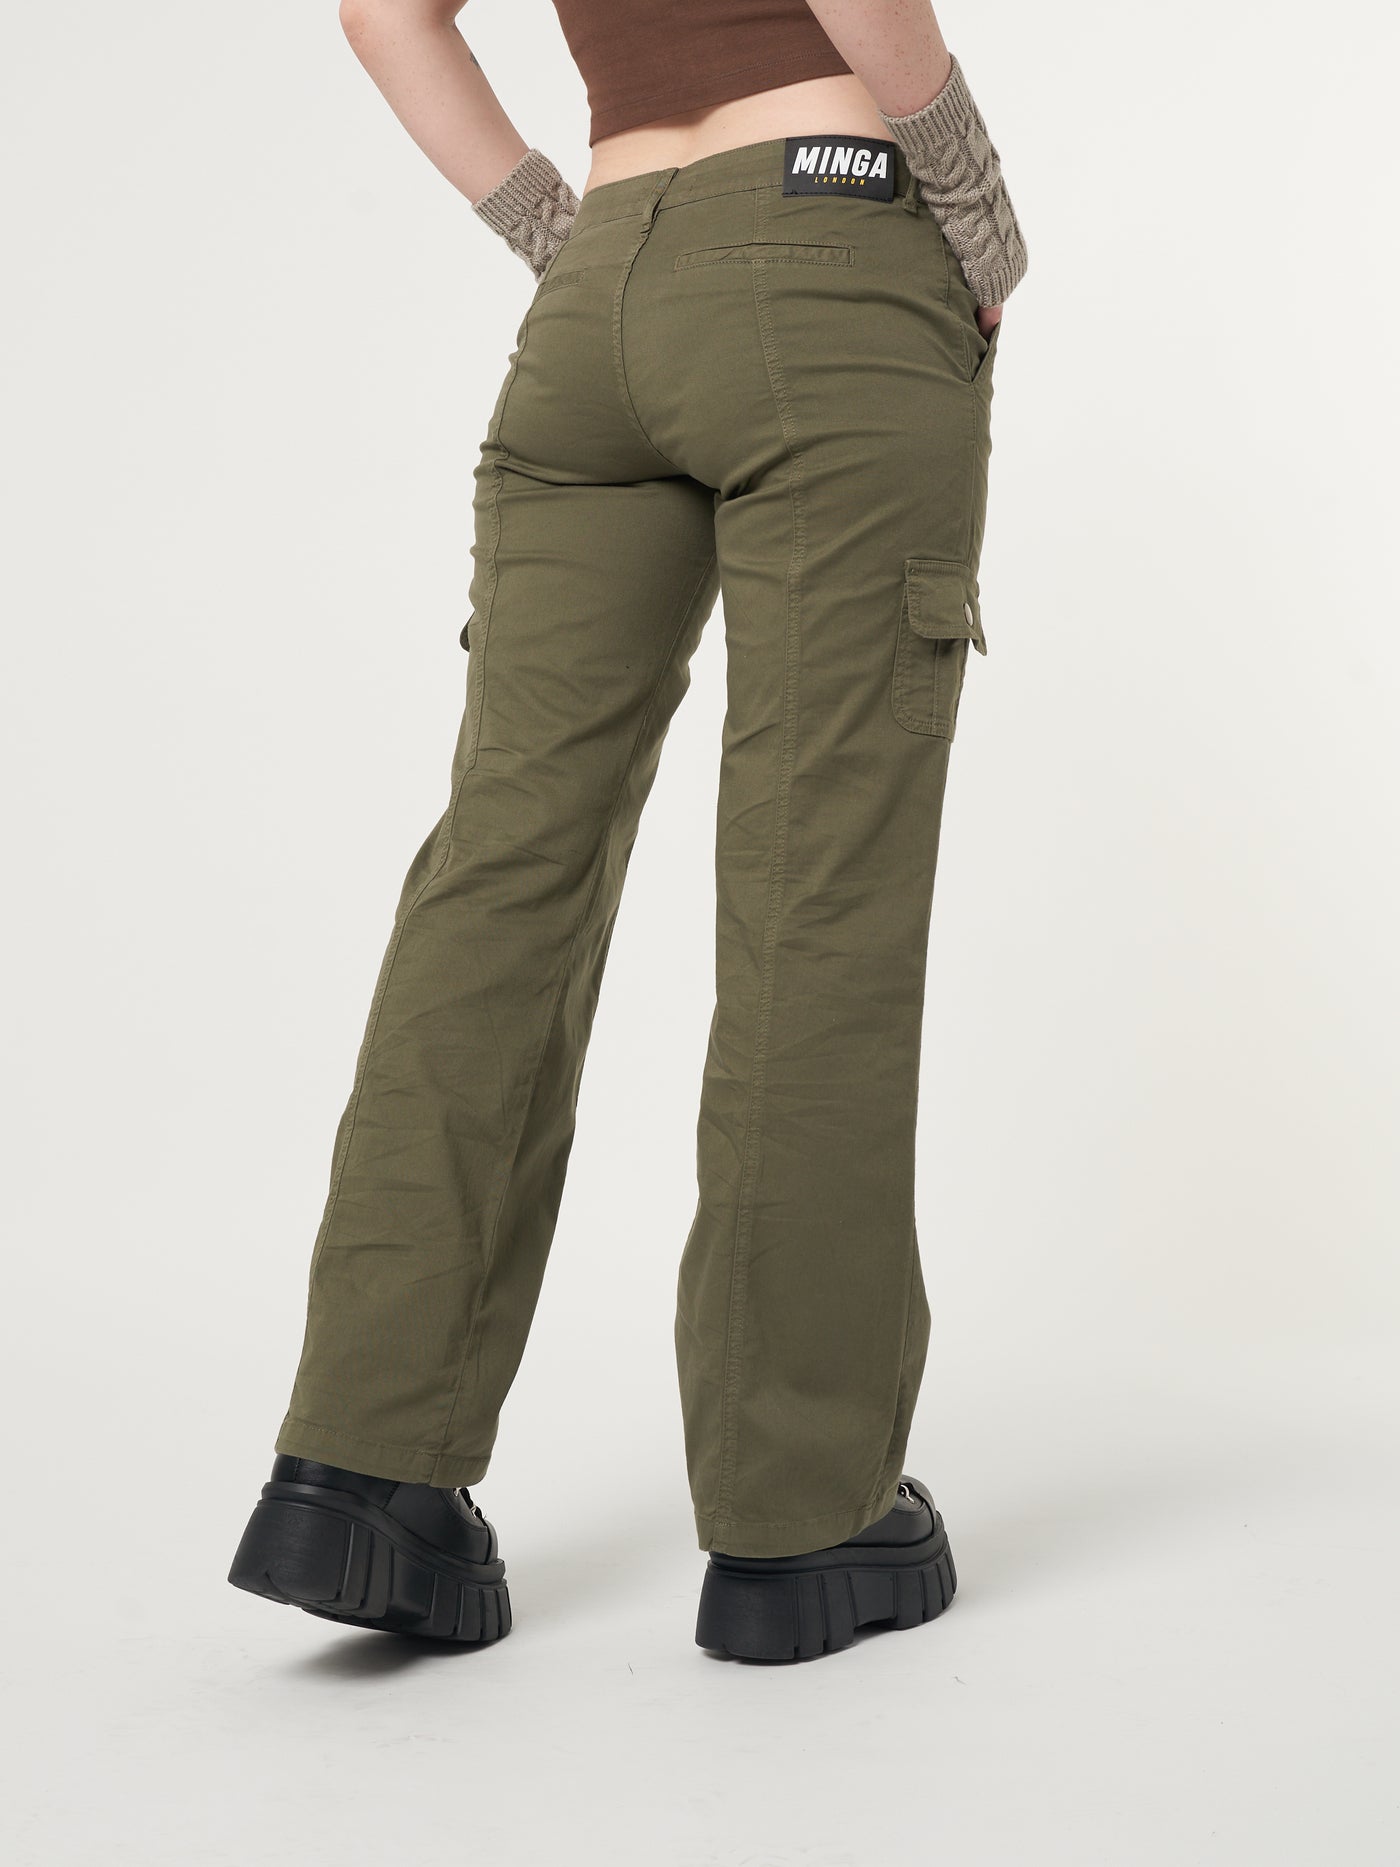 Eve Y2k Olive Green Cargo Flare Pants